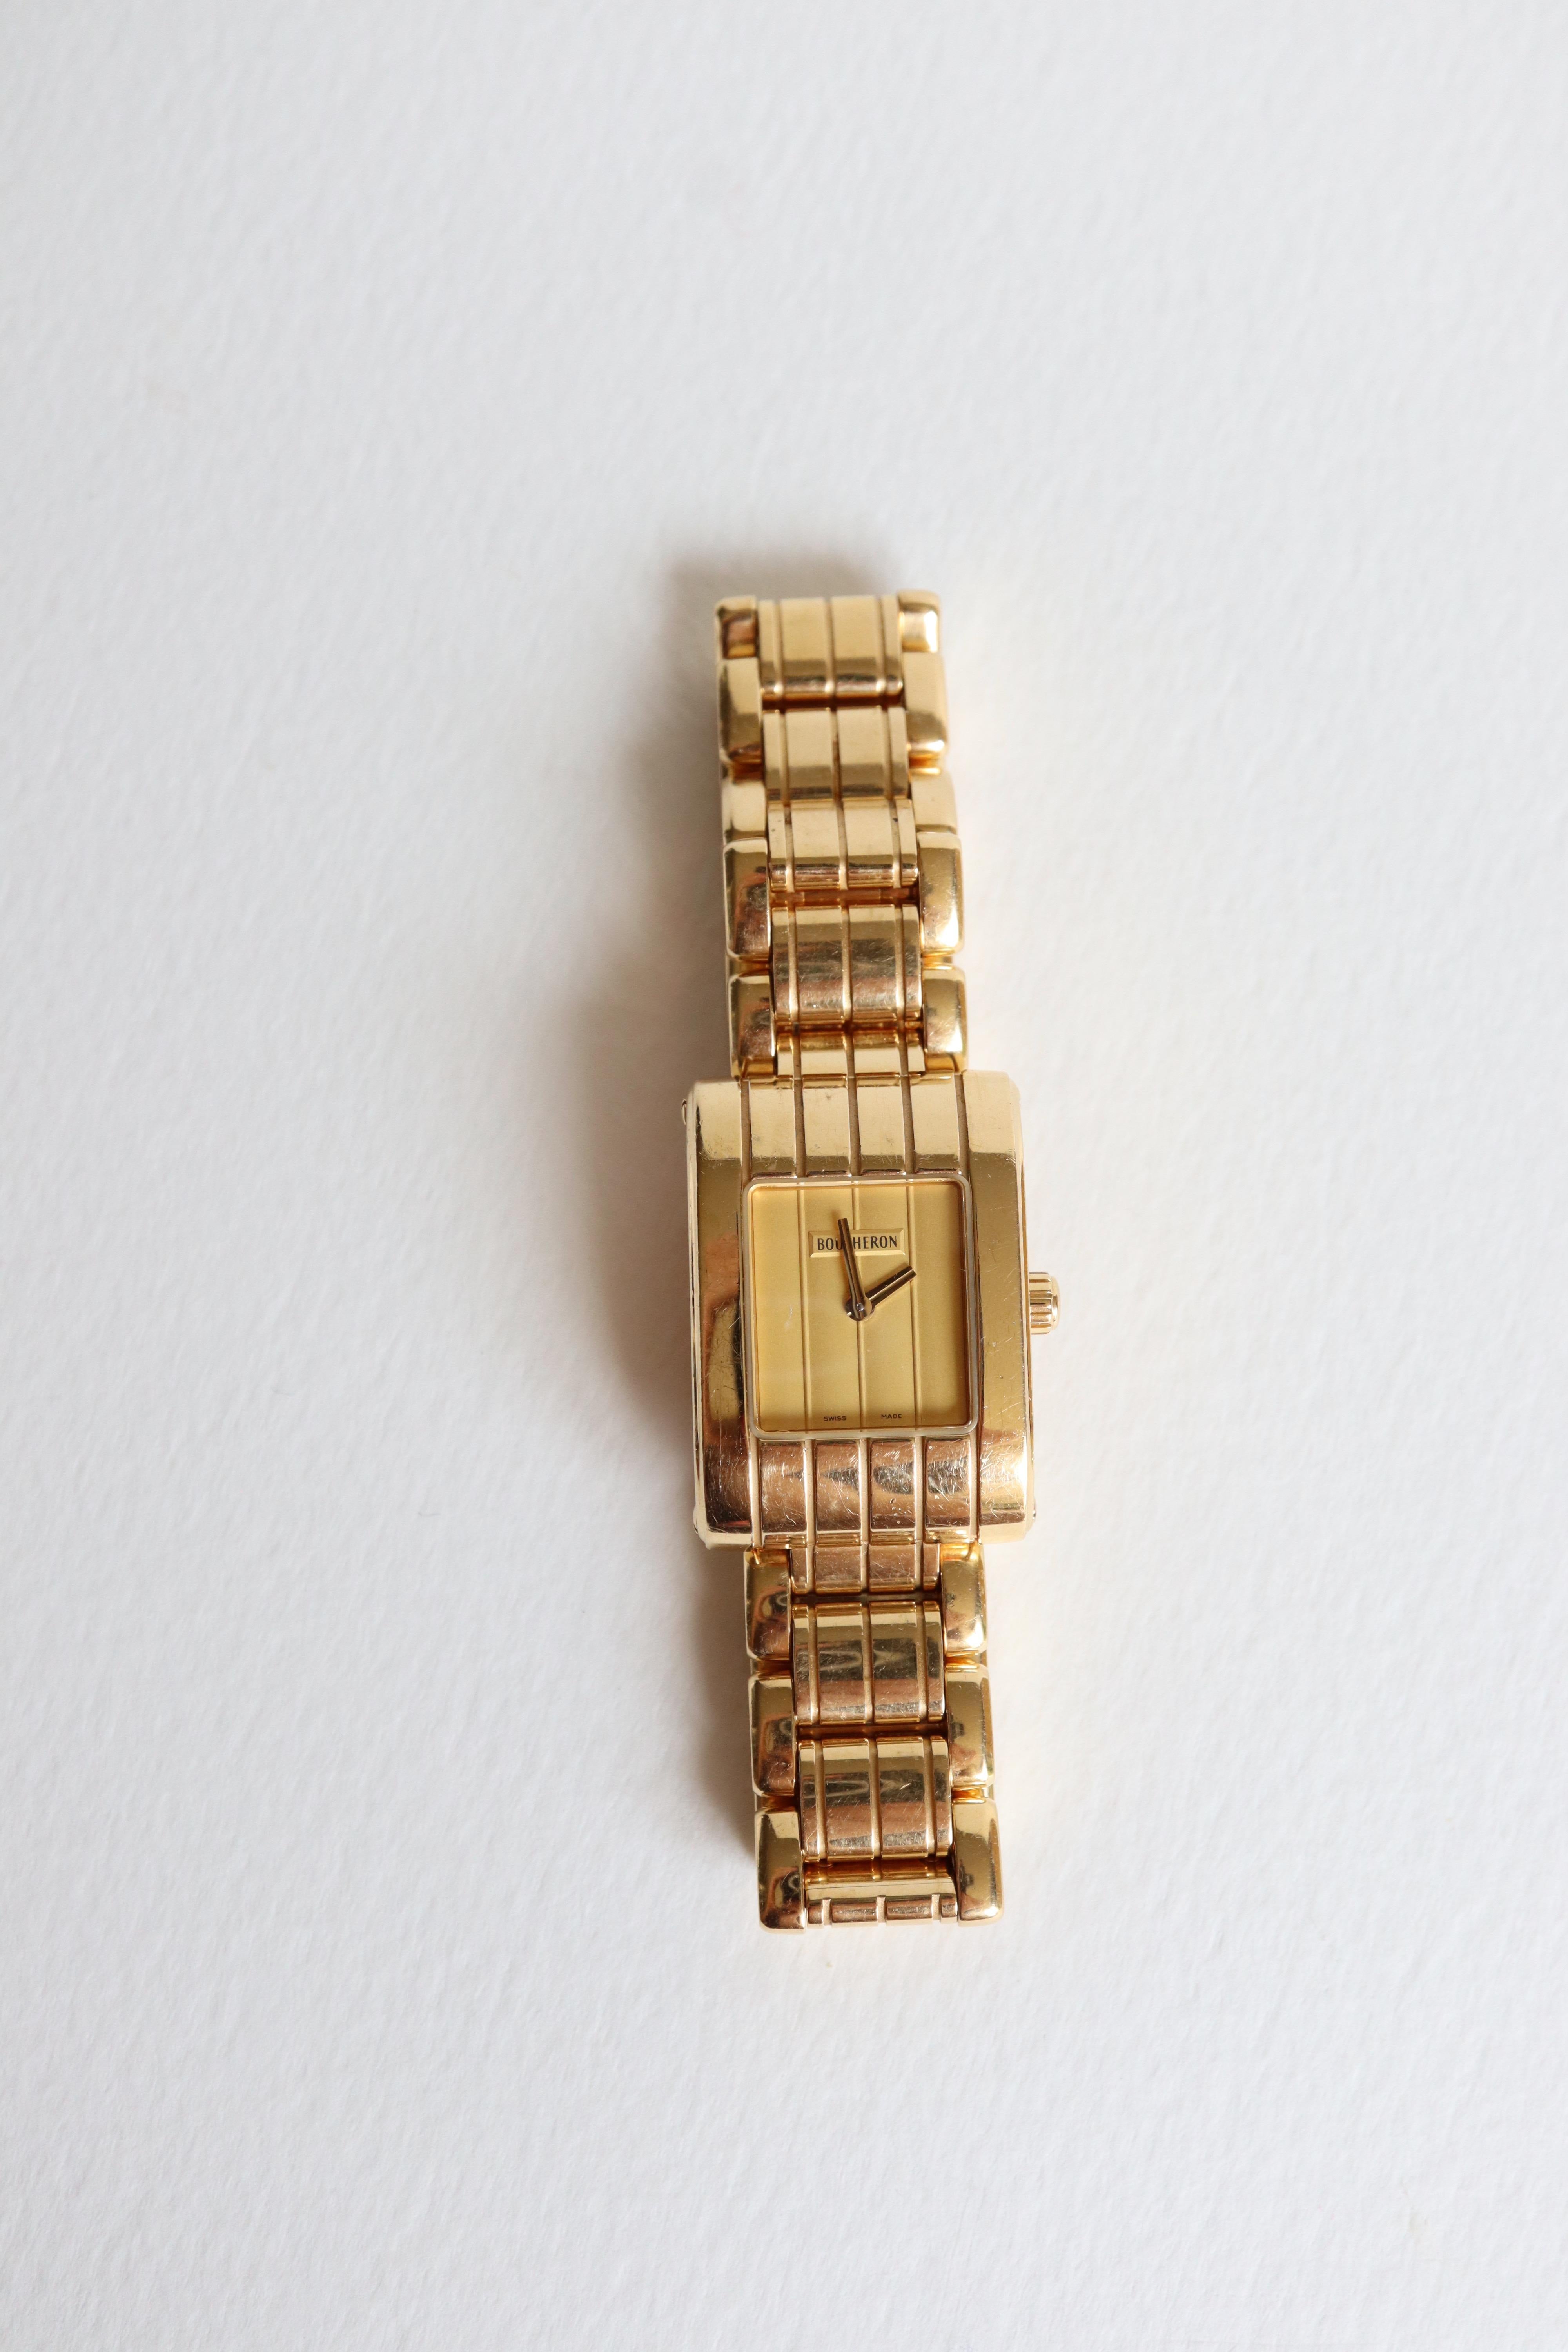 Boucheron Parallèle model watch in 18K yellow gold with Godrons
Signed Boucheron and numbered.  Swiss Made
Quartz movement, working
Gross weight: 134.2g 
Length: 17 cm Width: 1.5 cm Dial: Length: 3 cm width: 2 cm
